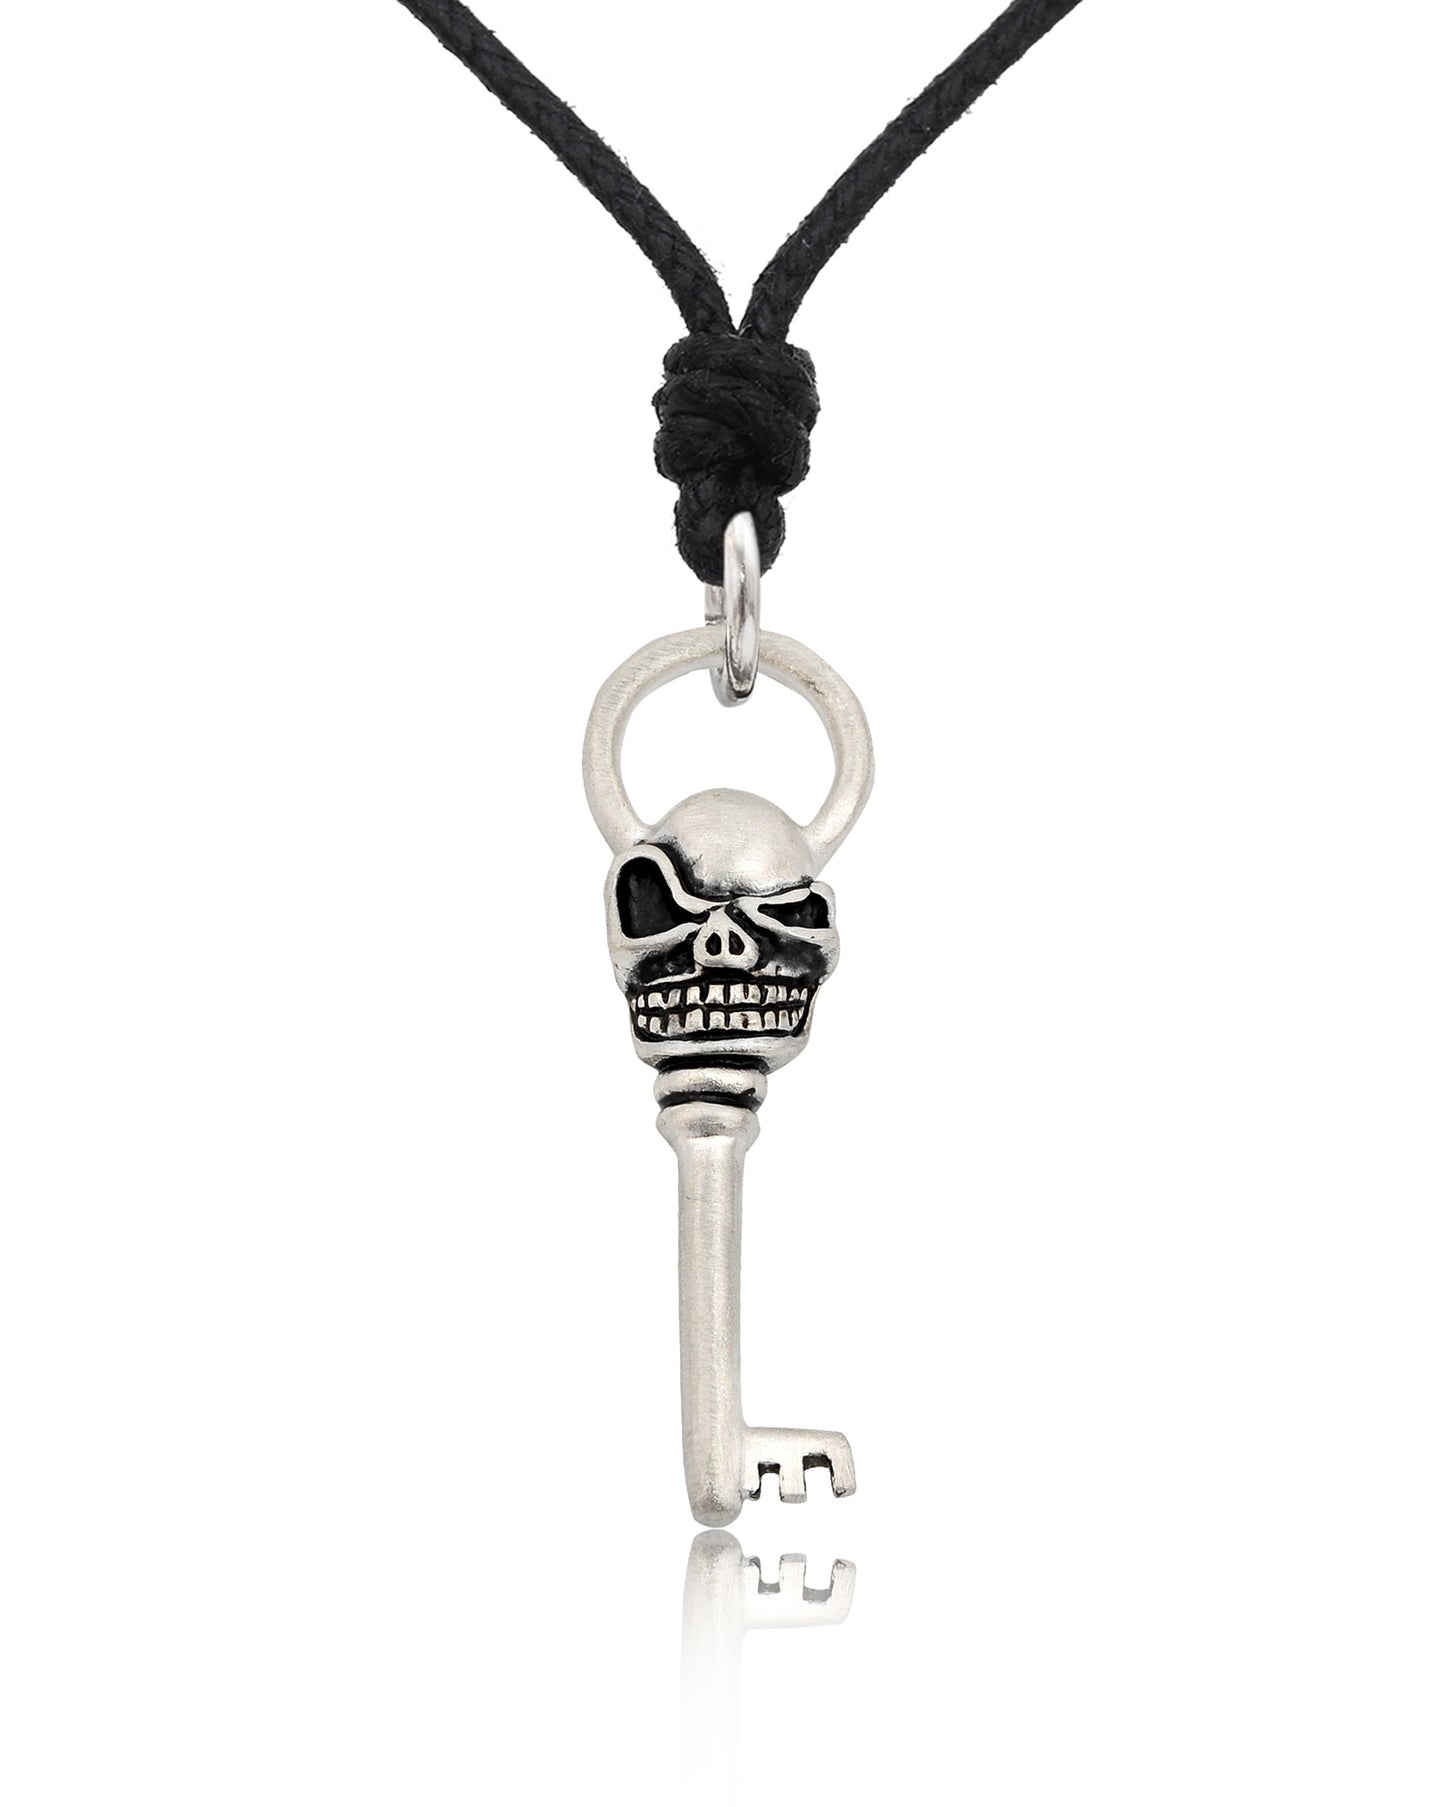 Skull Key Silver Pewter Charm Necklace Pendant Jewelry